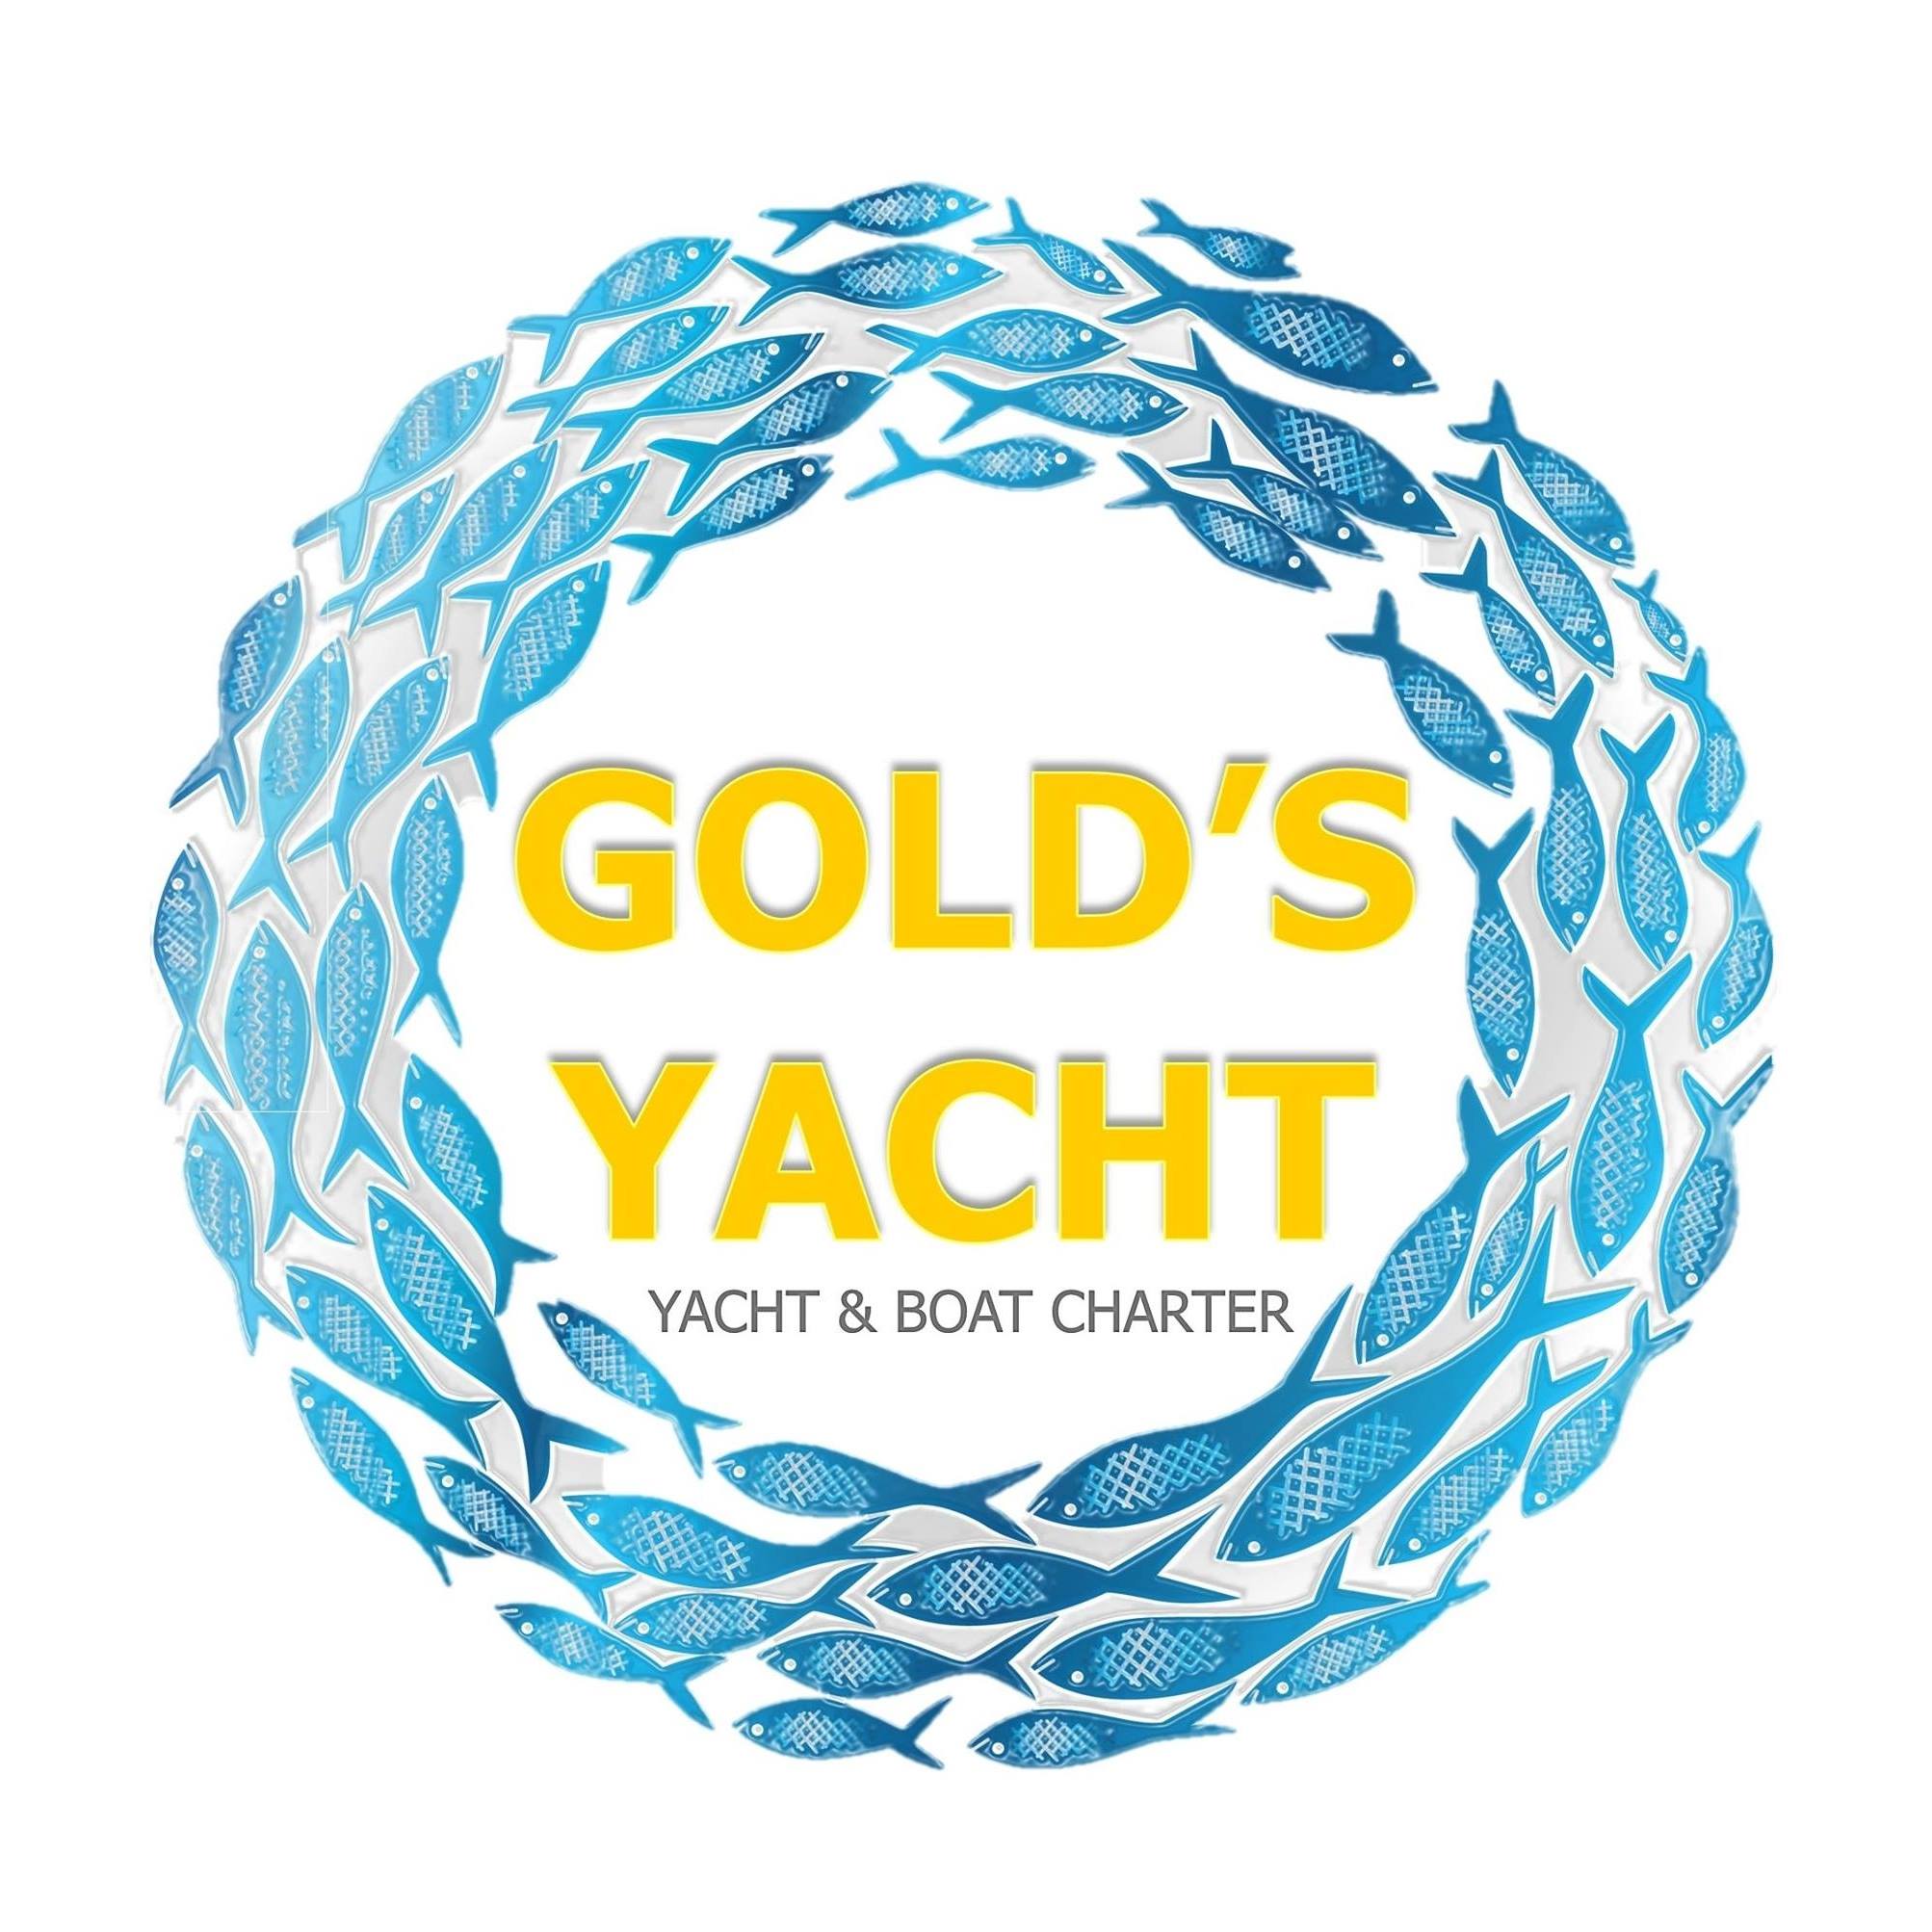 dubai luxury yacht rentaln logo consists of group of fishes formatting a circle inside it the word gold's yacht below it yacht and boat charter in a golden color